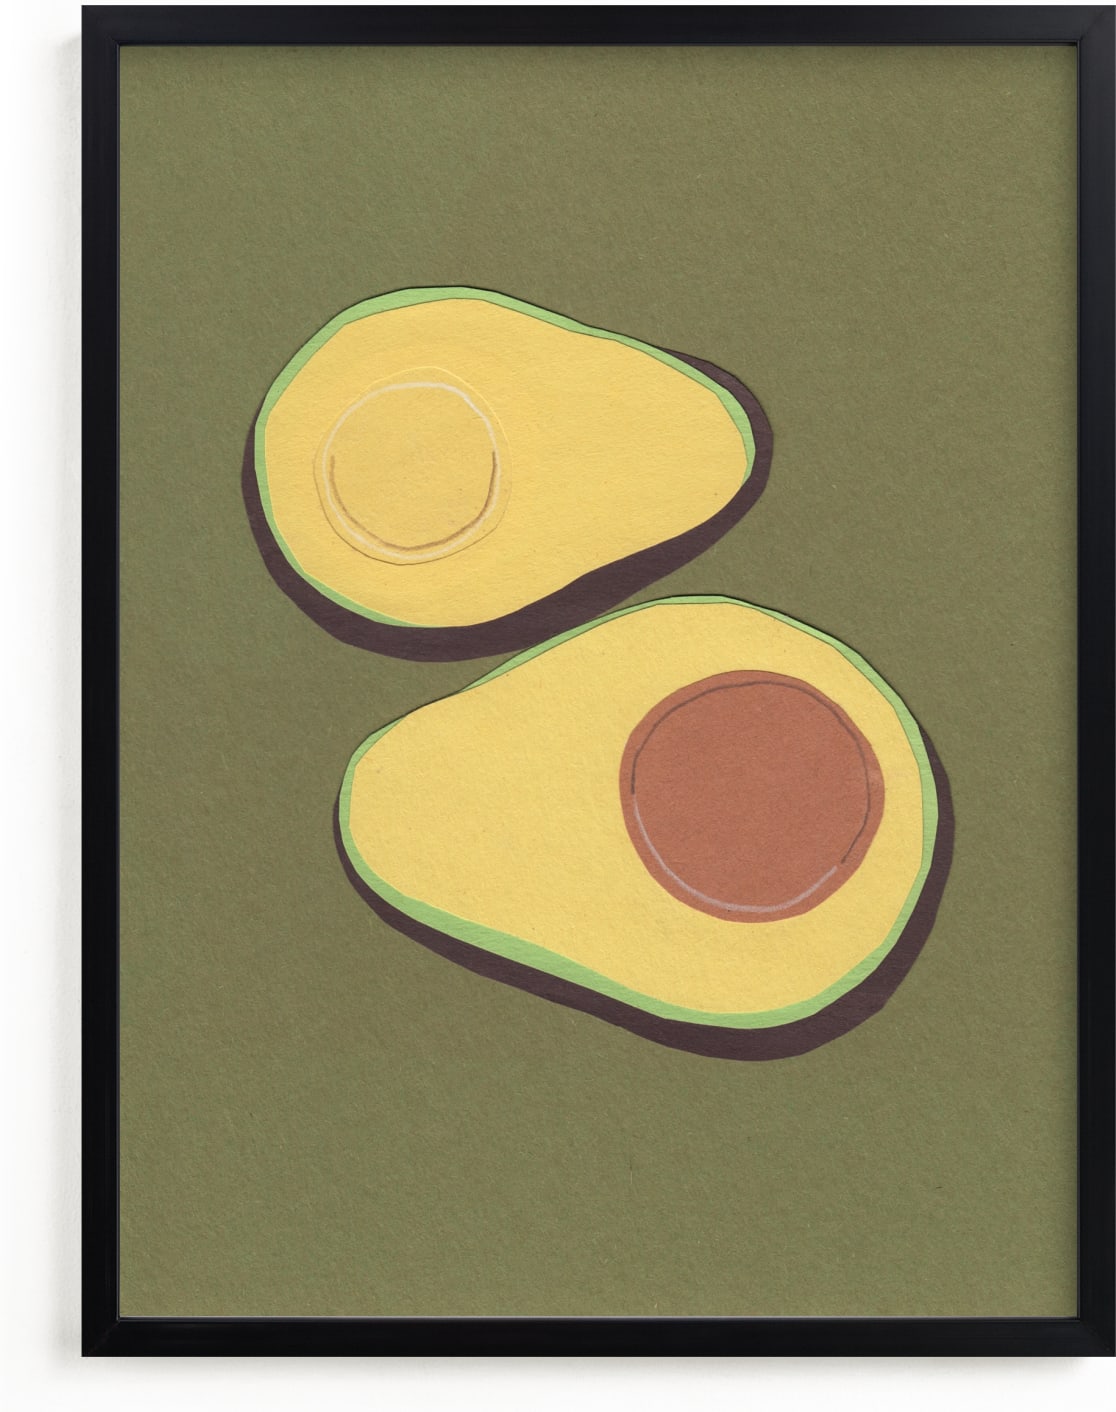 This is a brown art by Elliot Stokes called avocado.